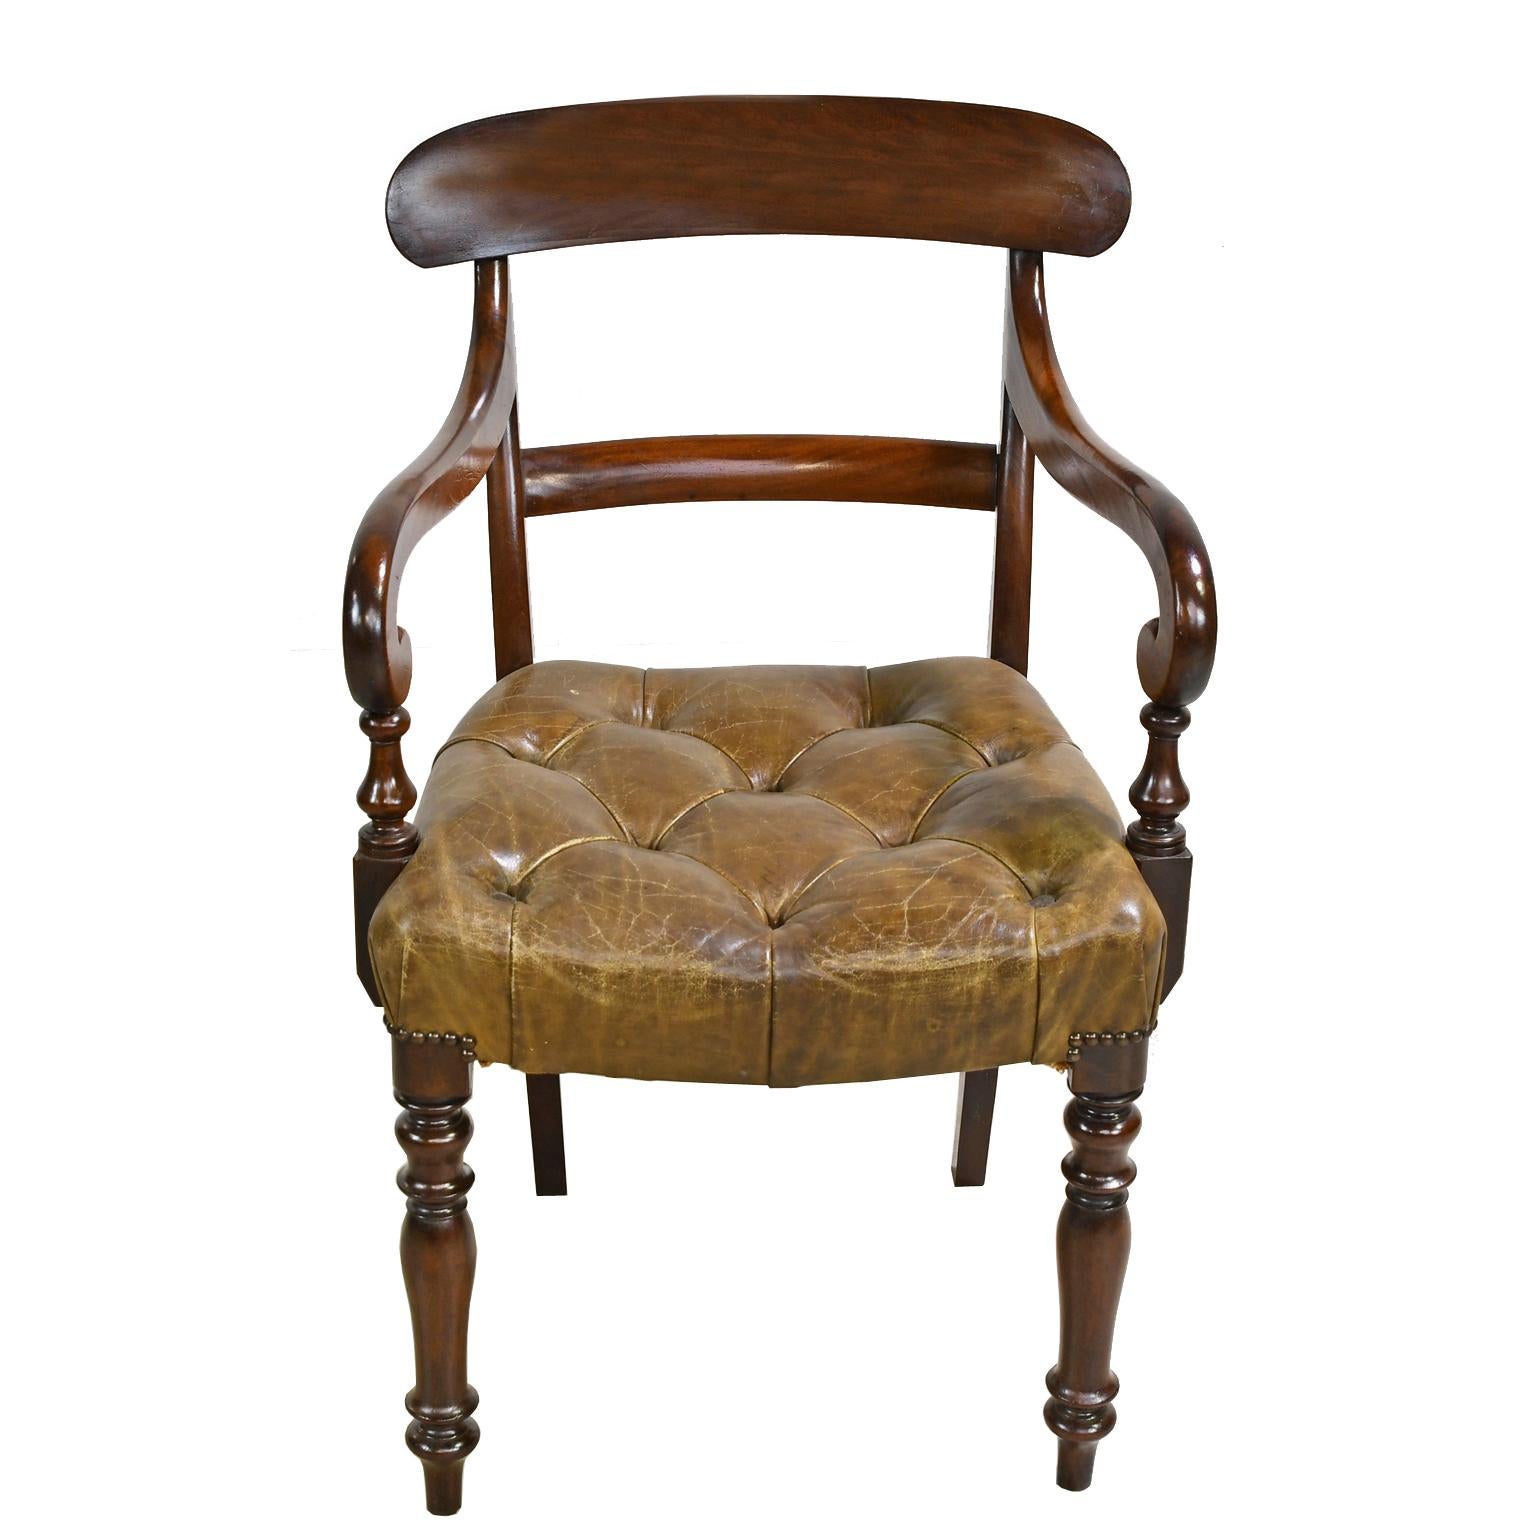 An early Victorian armchair in mahogany with curved top rail, scrolled arms, turned front legs and saber back legs. Seat is upholstered in a tufted, beige/camel-colored leather with brass nailheads. England, circa 1840. Note: There are a pair of